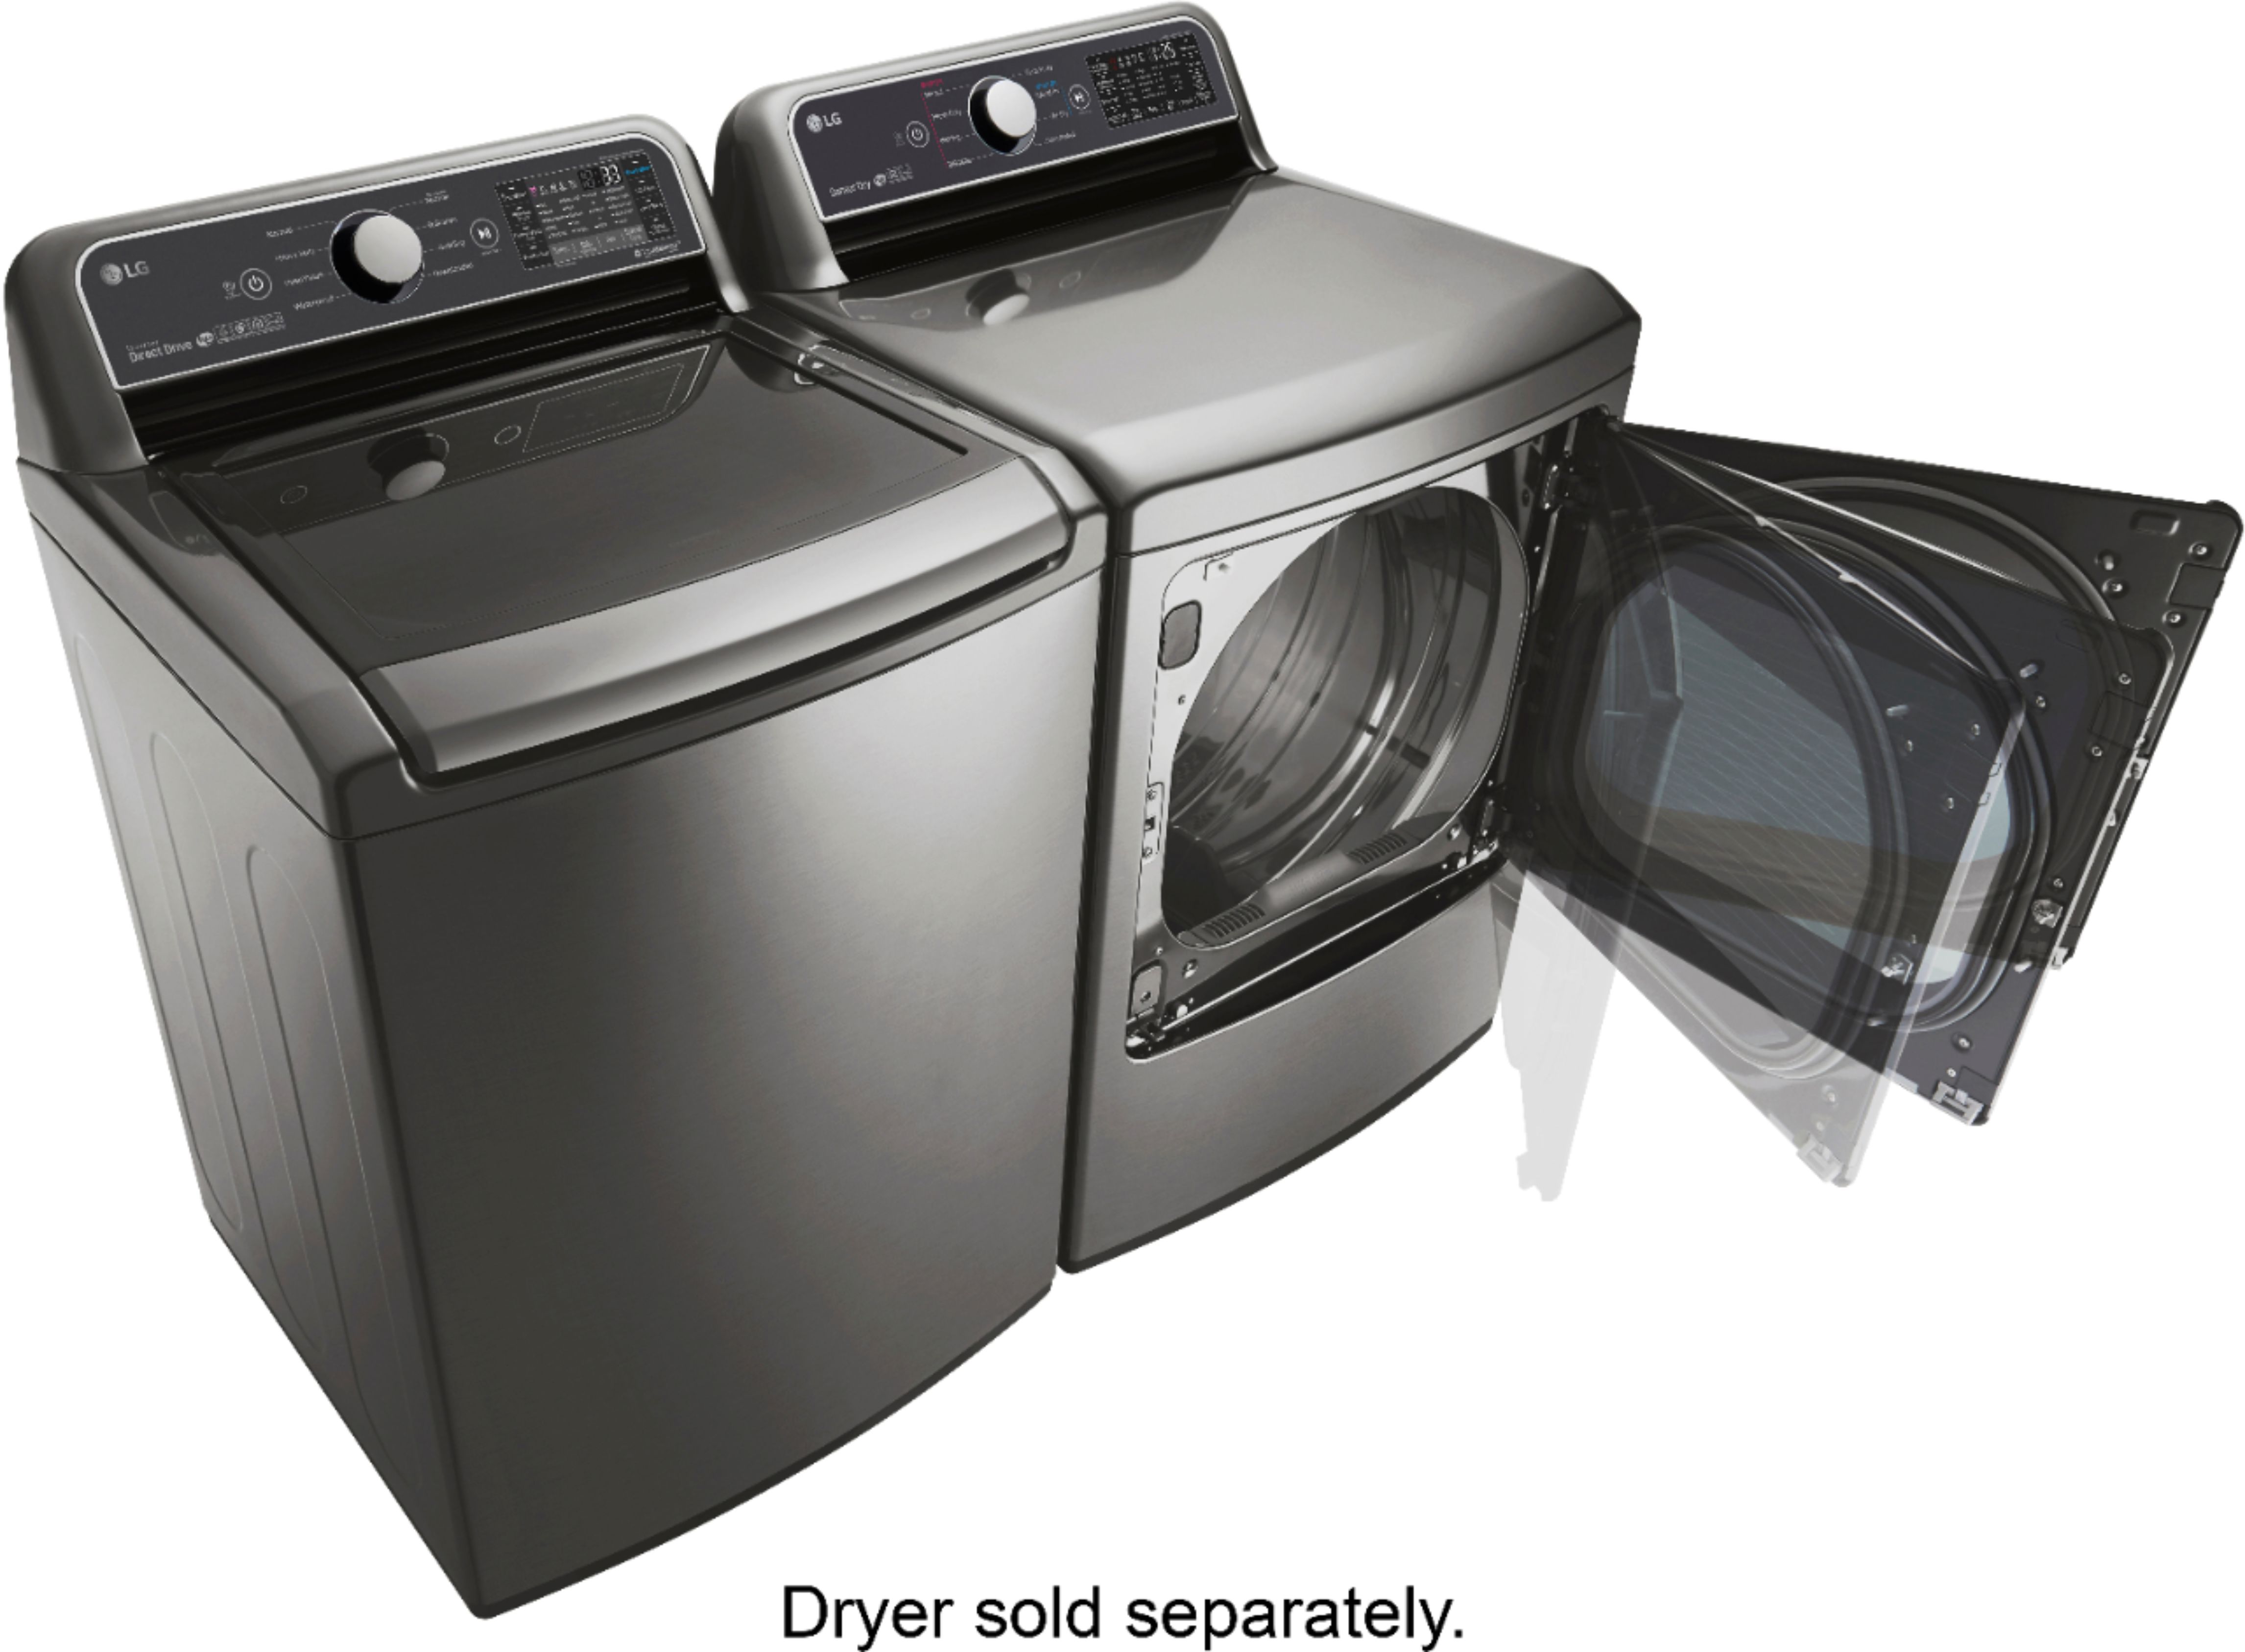 LG 5.0 Cu. Ft. HighEfficiency Smart Top Load Washer with TurboWash3D